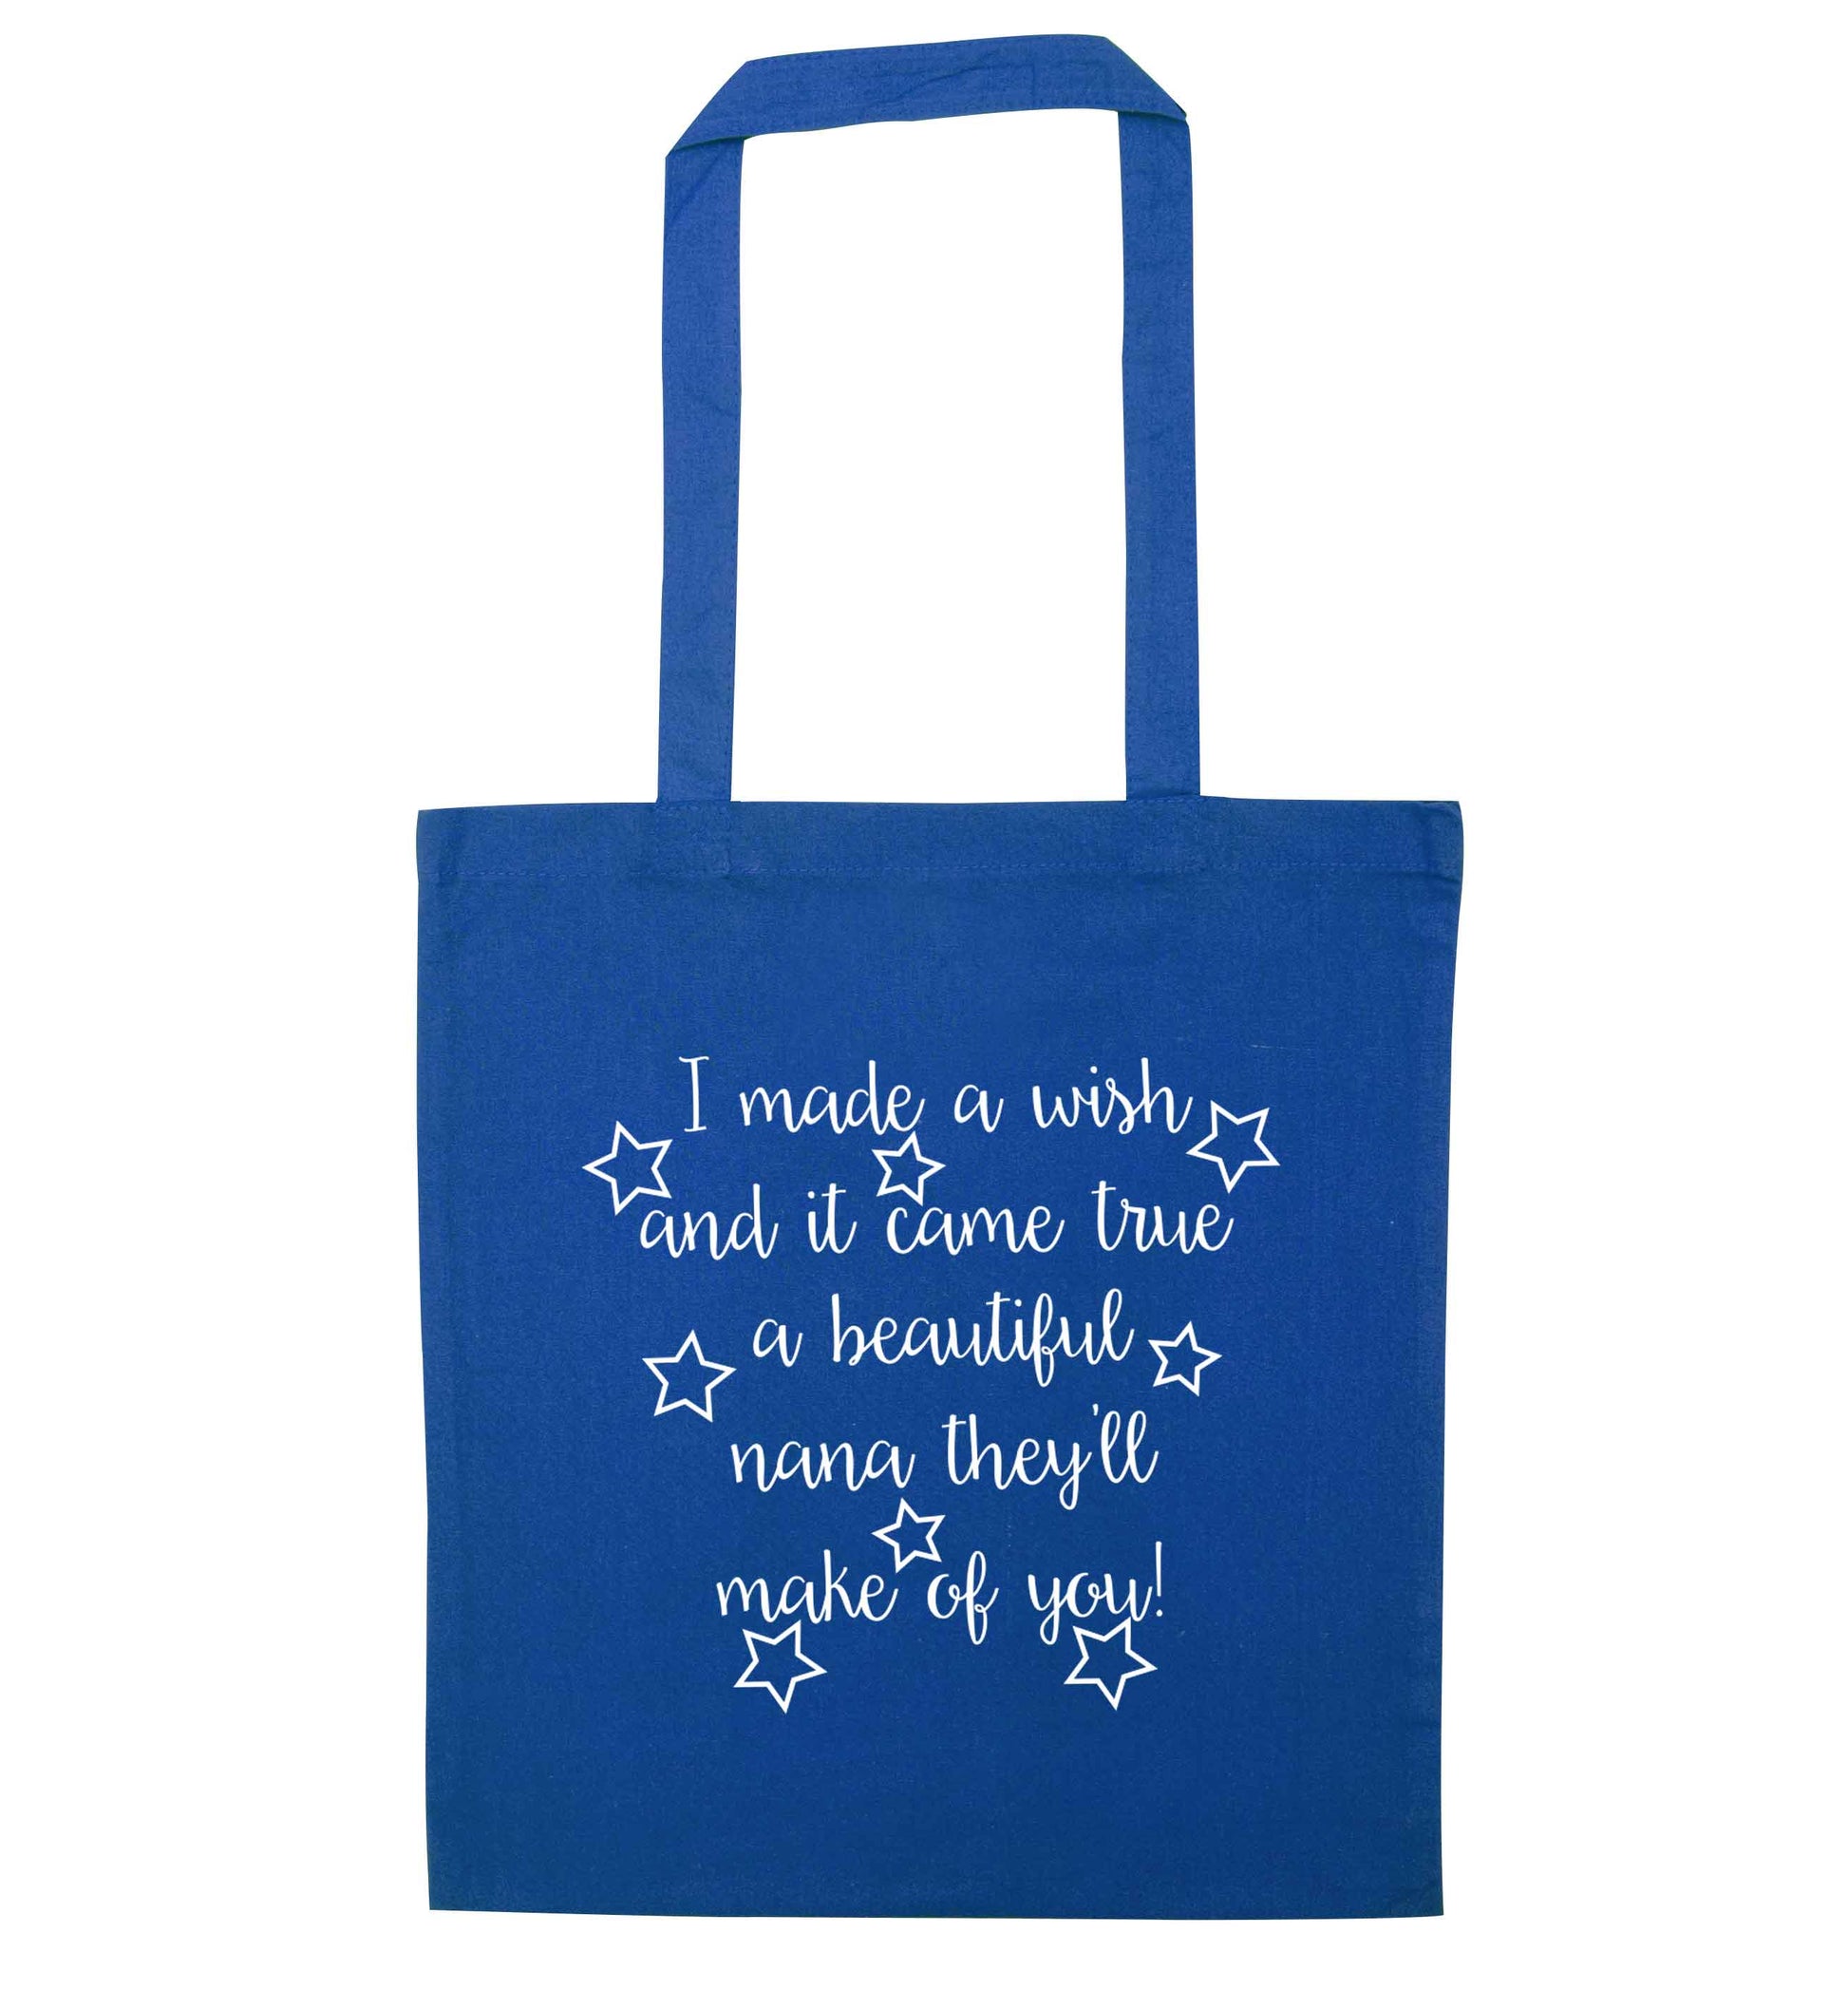 I made a wish and it came true a beautiful nana they'll make of you! blue tote bag